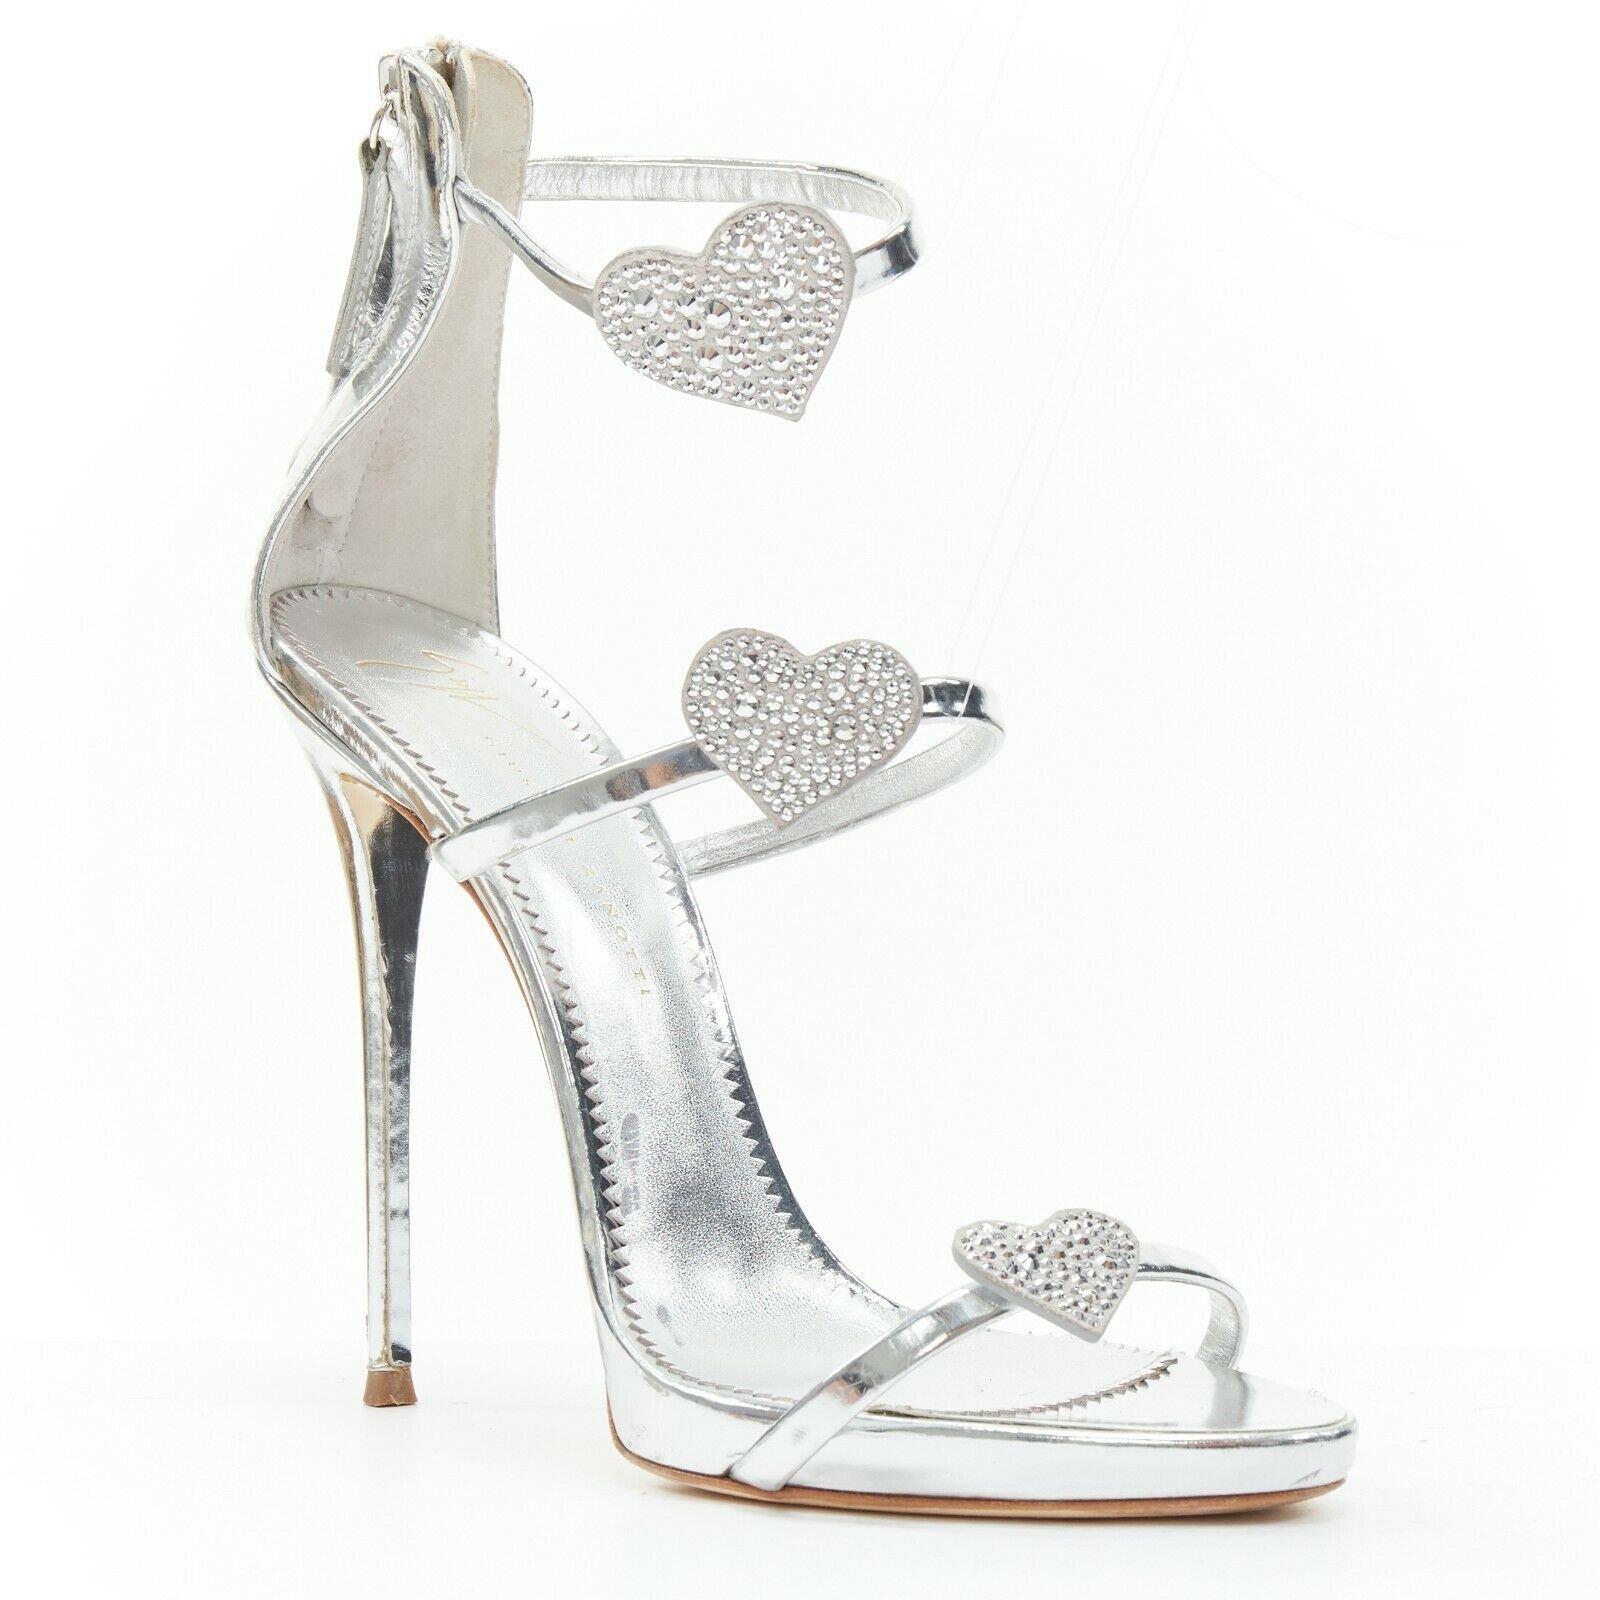 GIUSEPPE ZANOTTI Coline silver leather crystal heart high heel sandals EU39 
Reference: TGAS/A03175 
Brand: Giuseppe Zanotti 
Designer: Giuseppe Zanotti 
Model: Giuseppe Zanotti Coline 
Material: Leather 
Color: Silver 
Pattern: Solid 
Closure: Zip